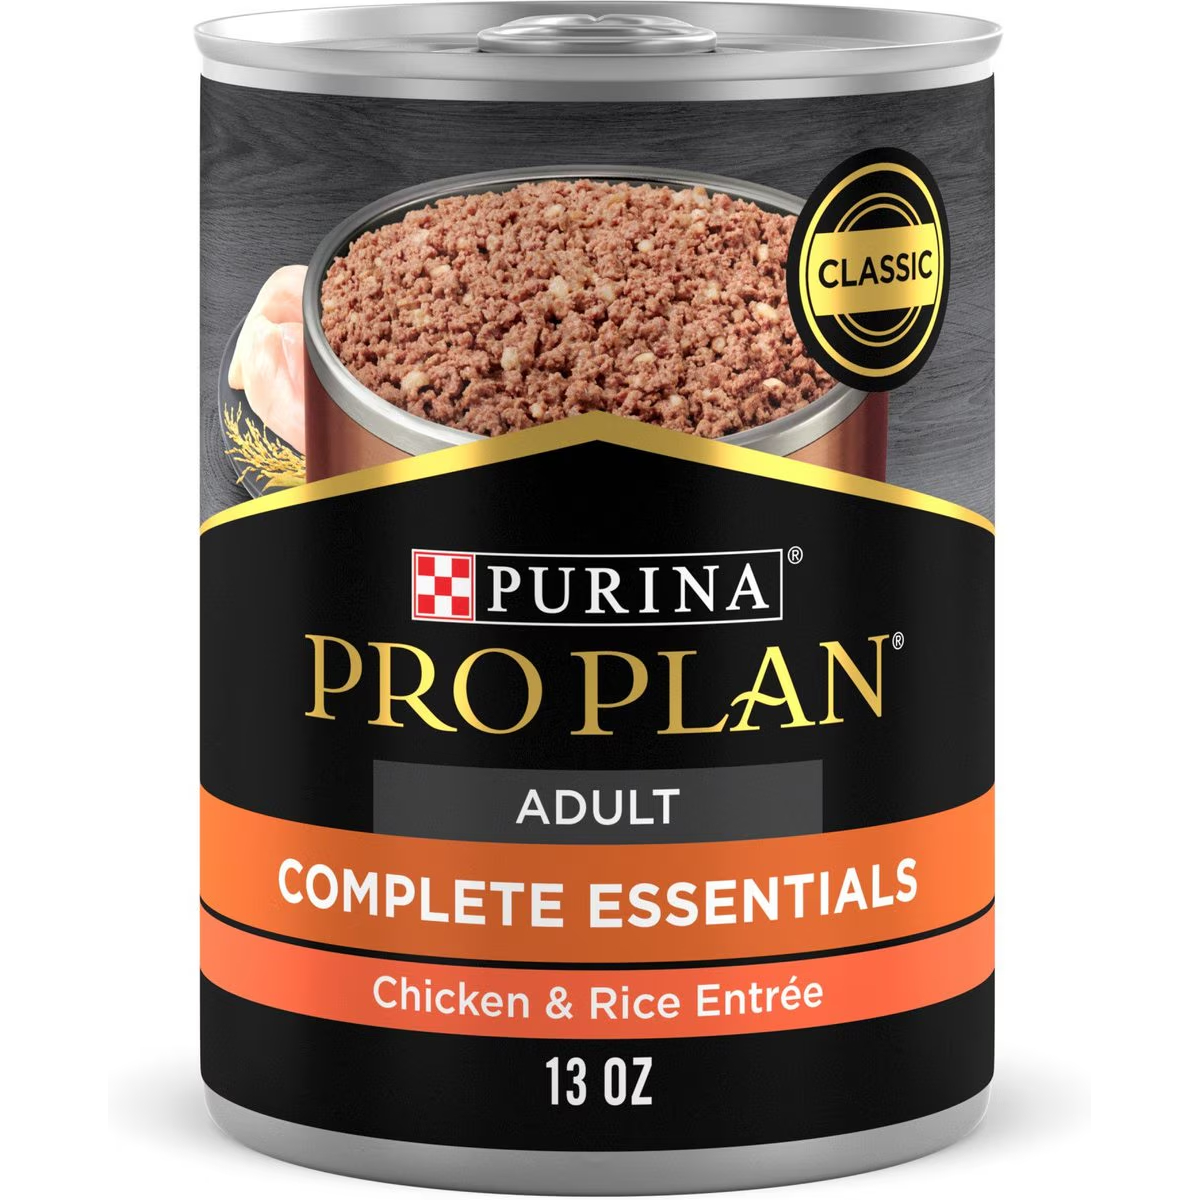 Purina Pro Plan Adult Classic Canned Dog Food